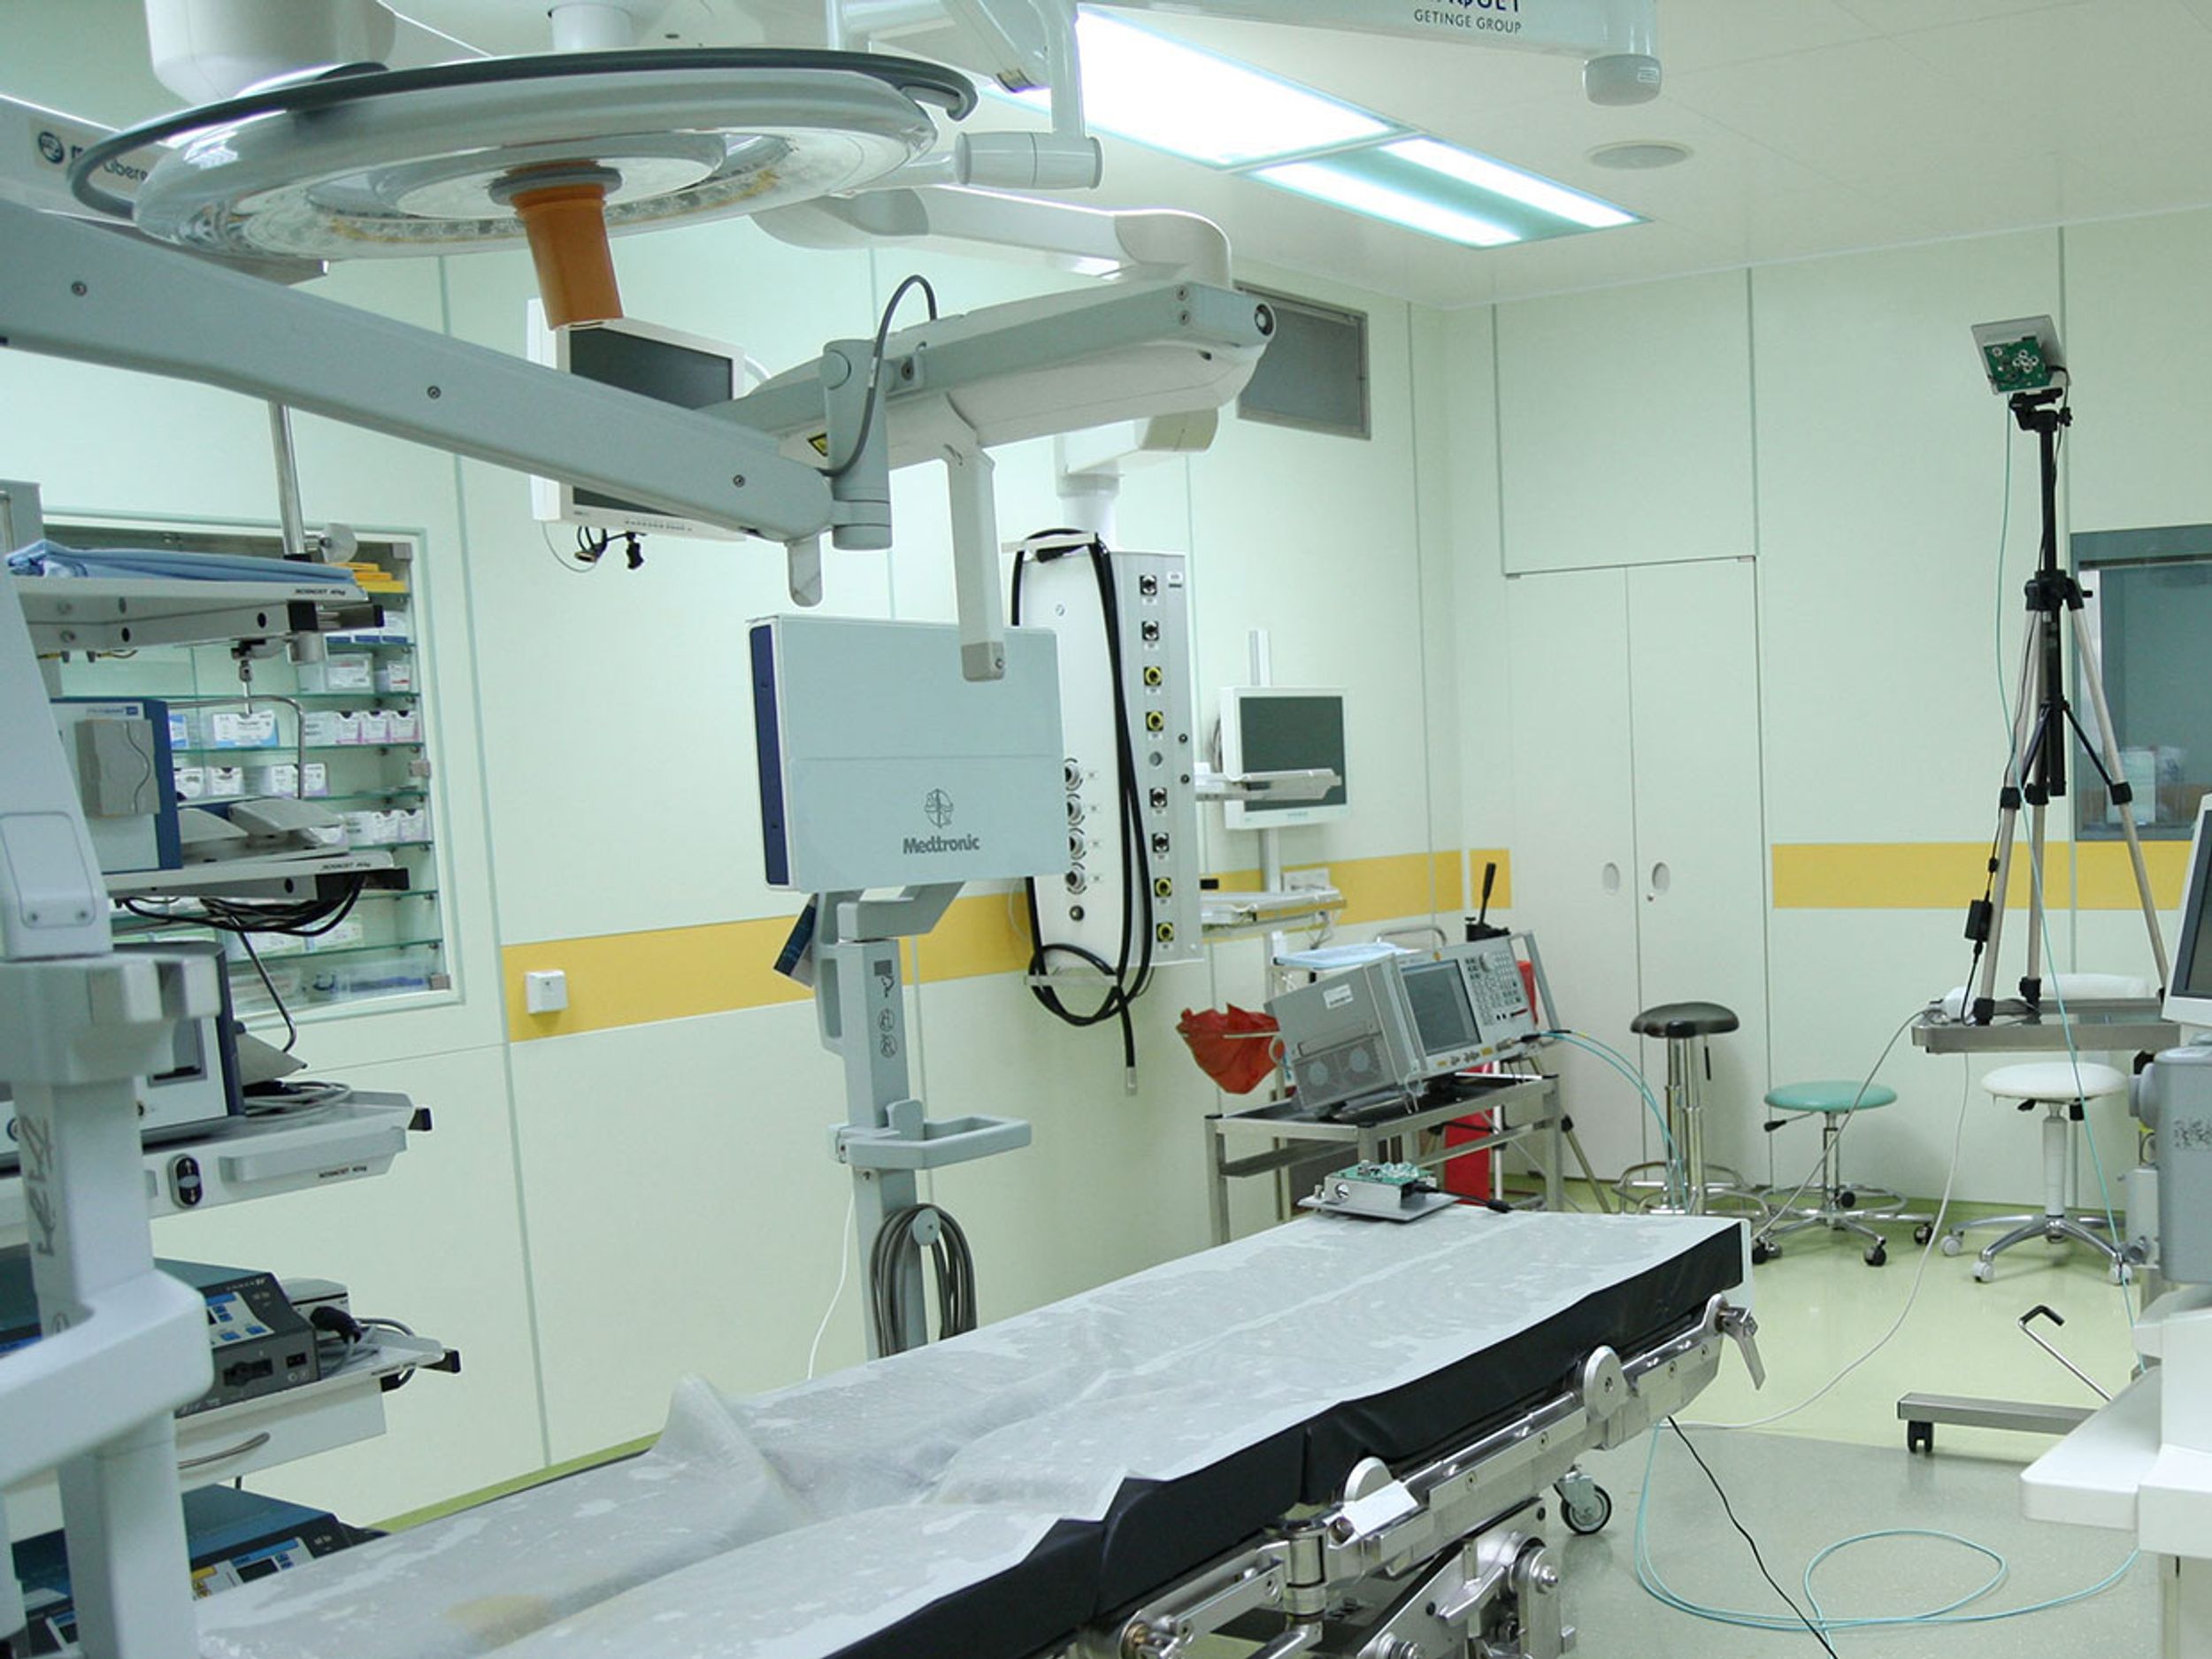 Neuro surgery operation room at FN Motol University Hospital, Prague used for the LiFi channel measurements